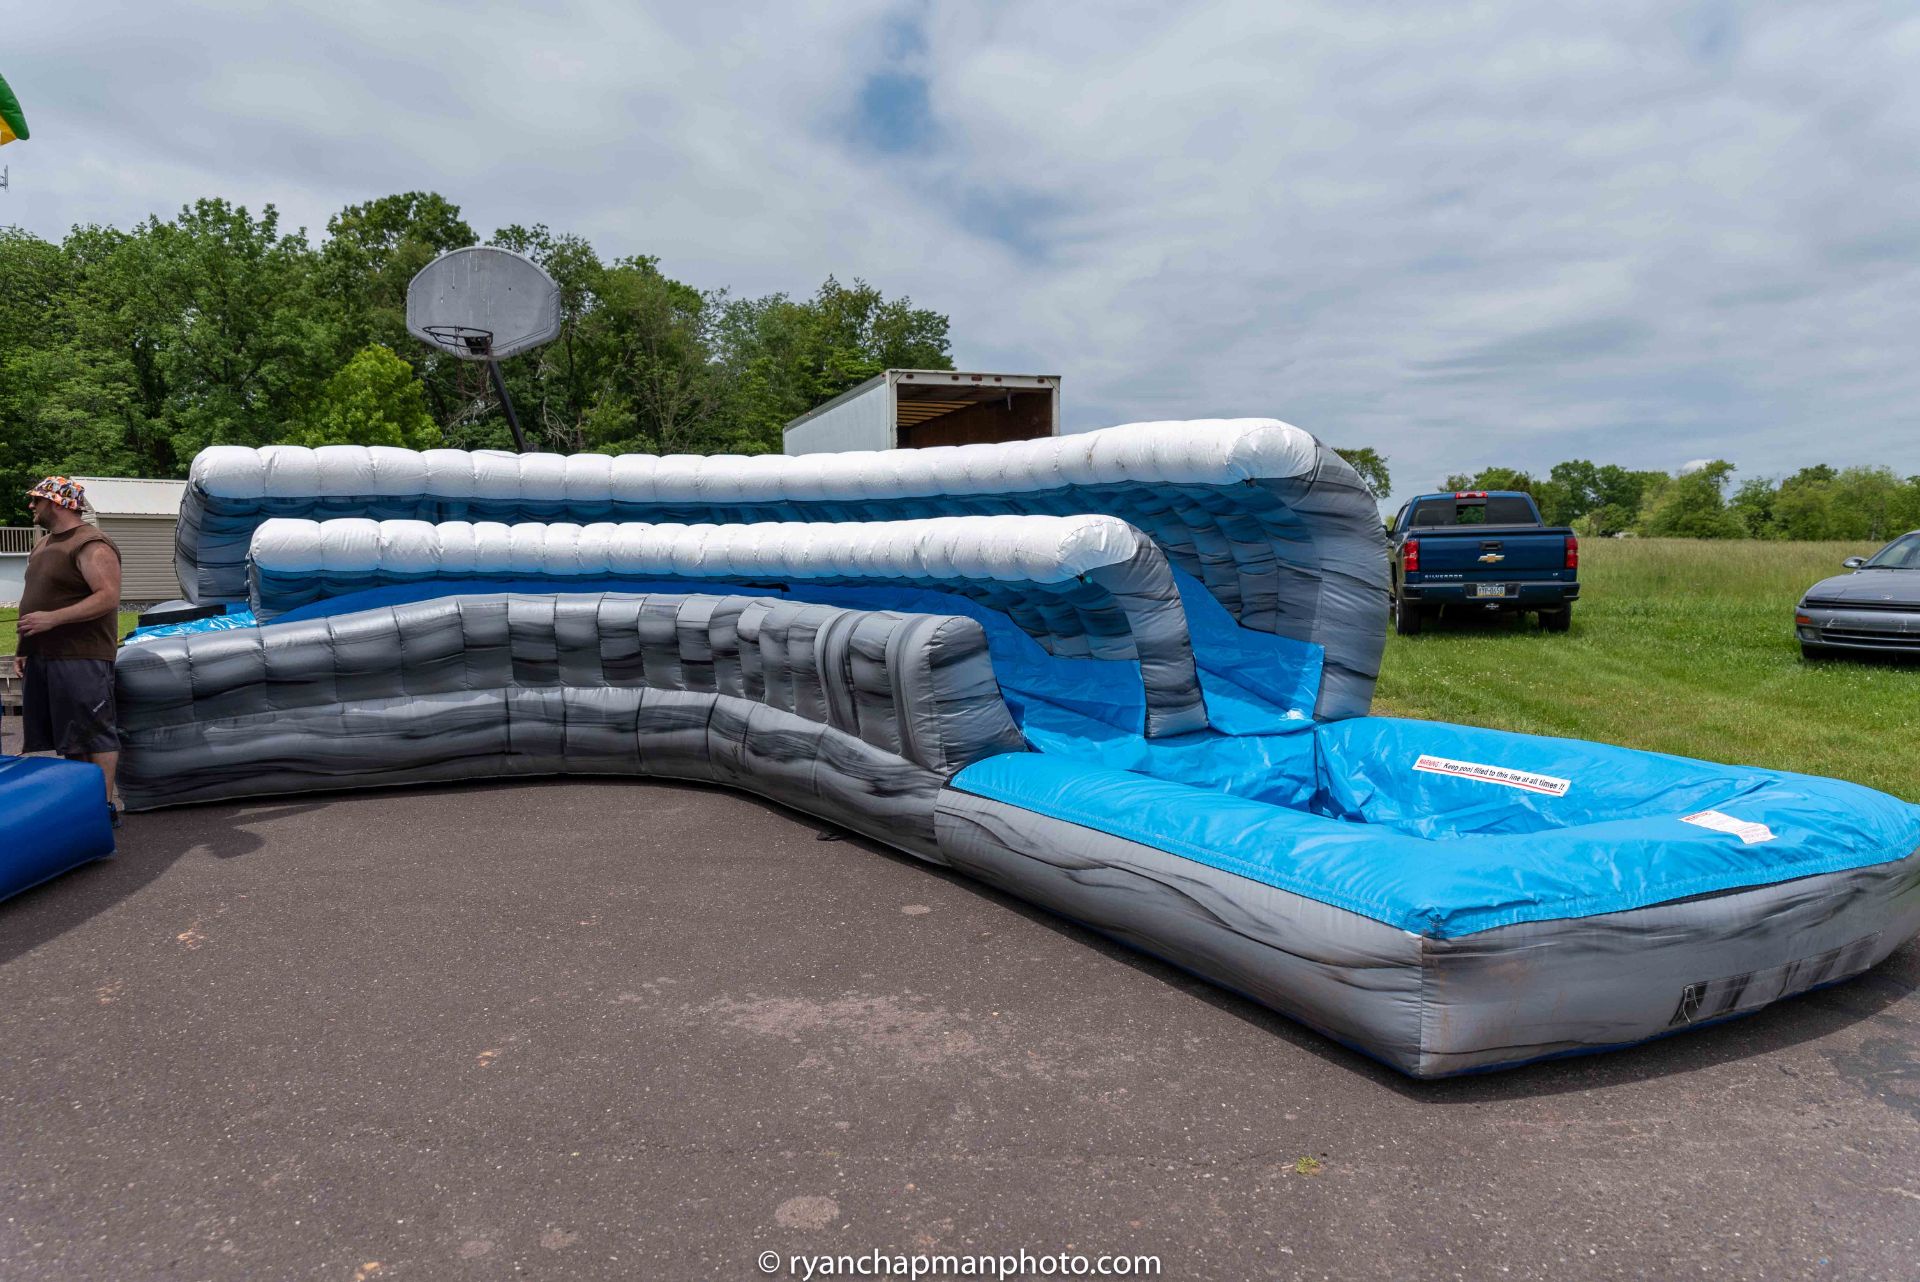 ROARING RIVERS CURVED SLIP-N-SLIDE INFLATABLE - (LOCATED AT TELFORD, PA) - Image 6 of 7